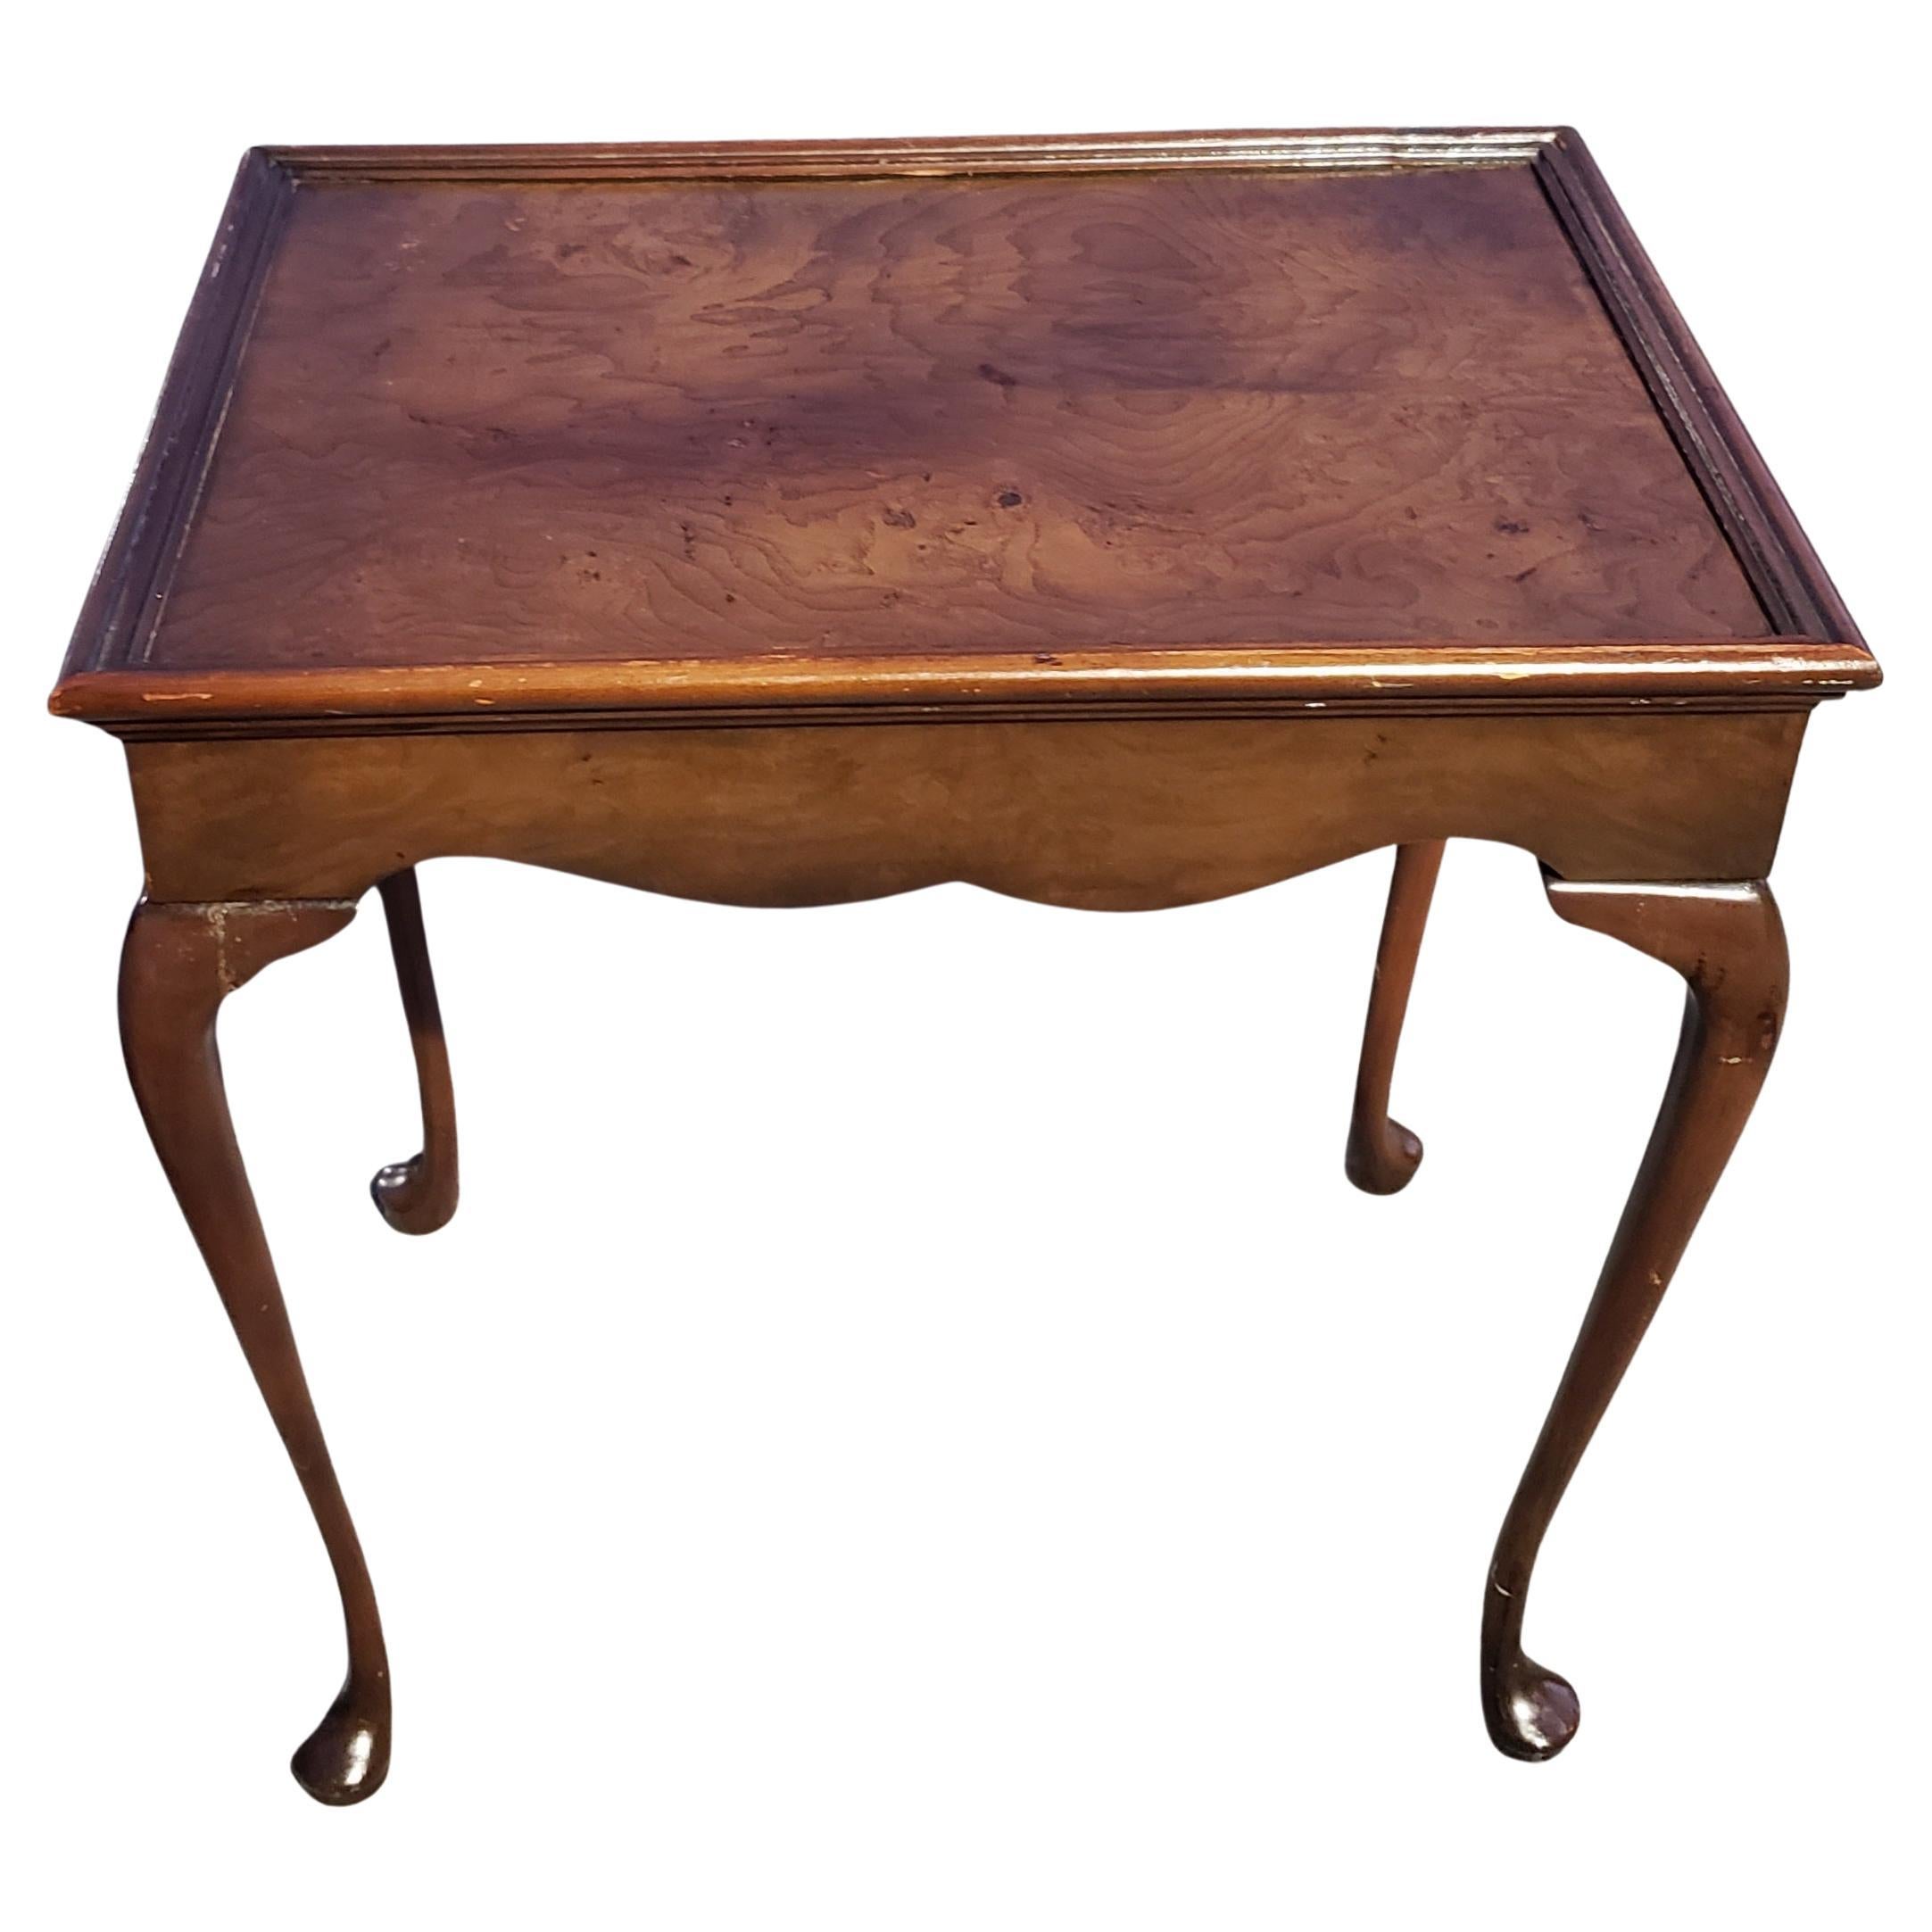 Exquisite Queen Anne side table by Baker Furniture in mahogany and burled walnut top. Good vintage condition with wear co sisters with age and use. 
Measure 14 inches in width, 20 inches  in depth and stand 21.25 inches tall. 